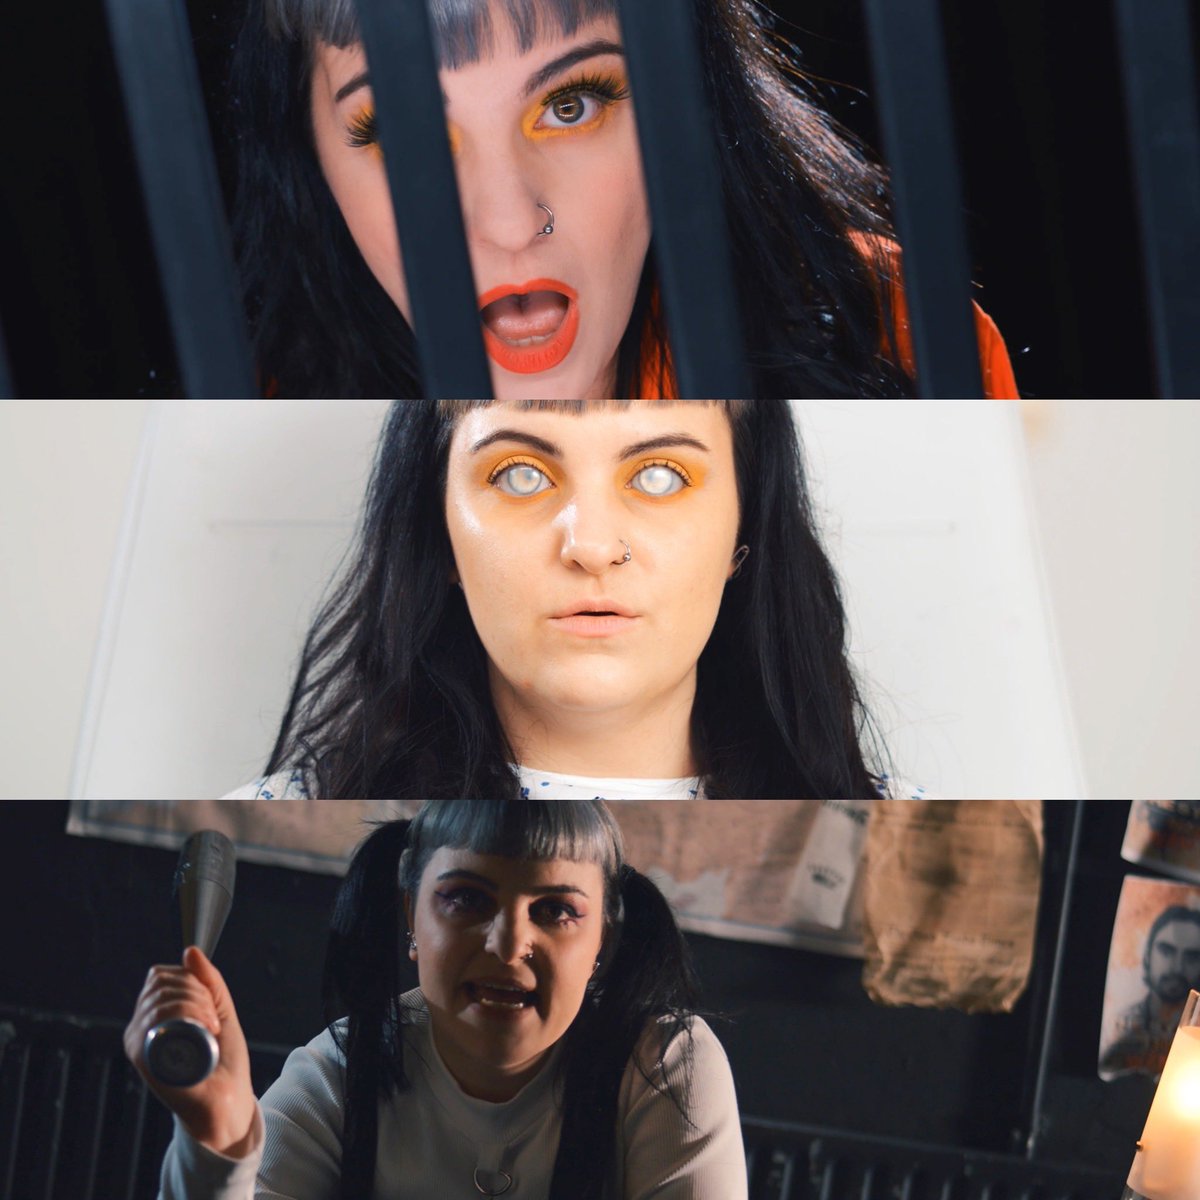 The three looks of @TigressKaty in the brand new @TIGRESSofficial video for #disconnect 🎥